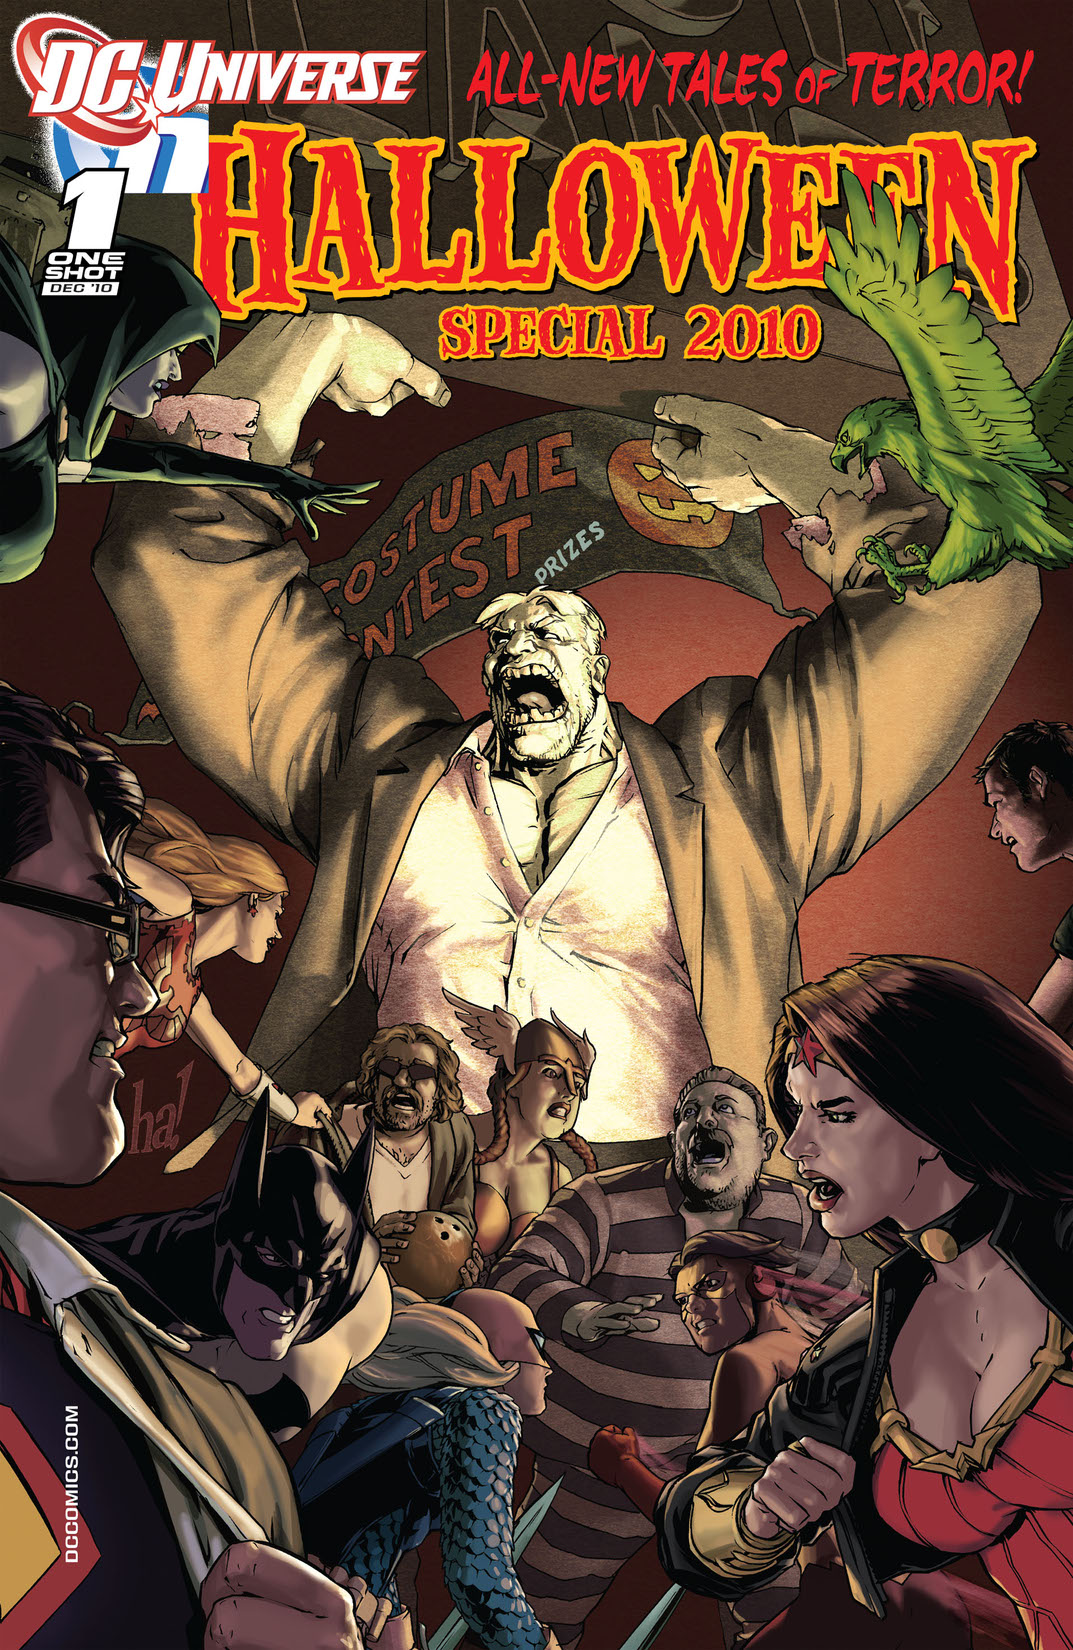 DCU Halloween Special 2010 #1 preview images